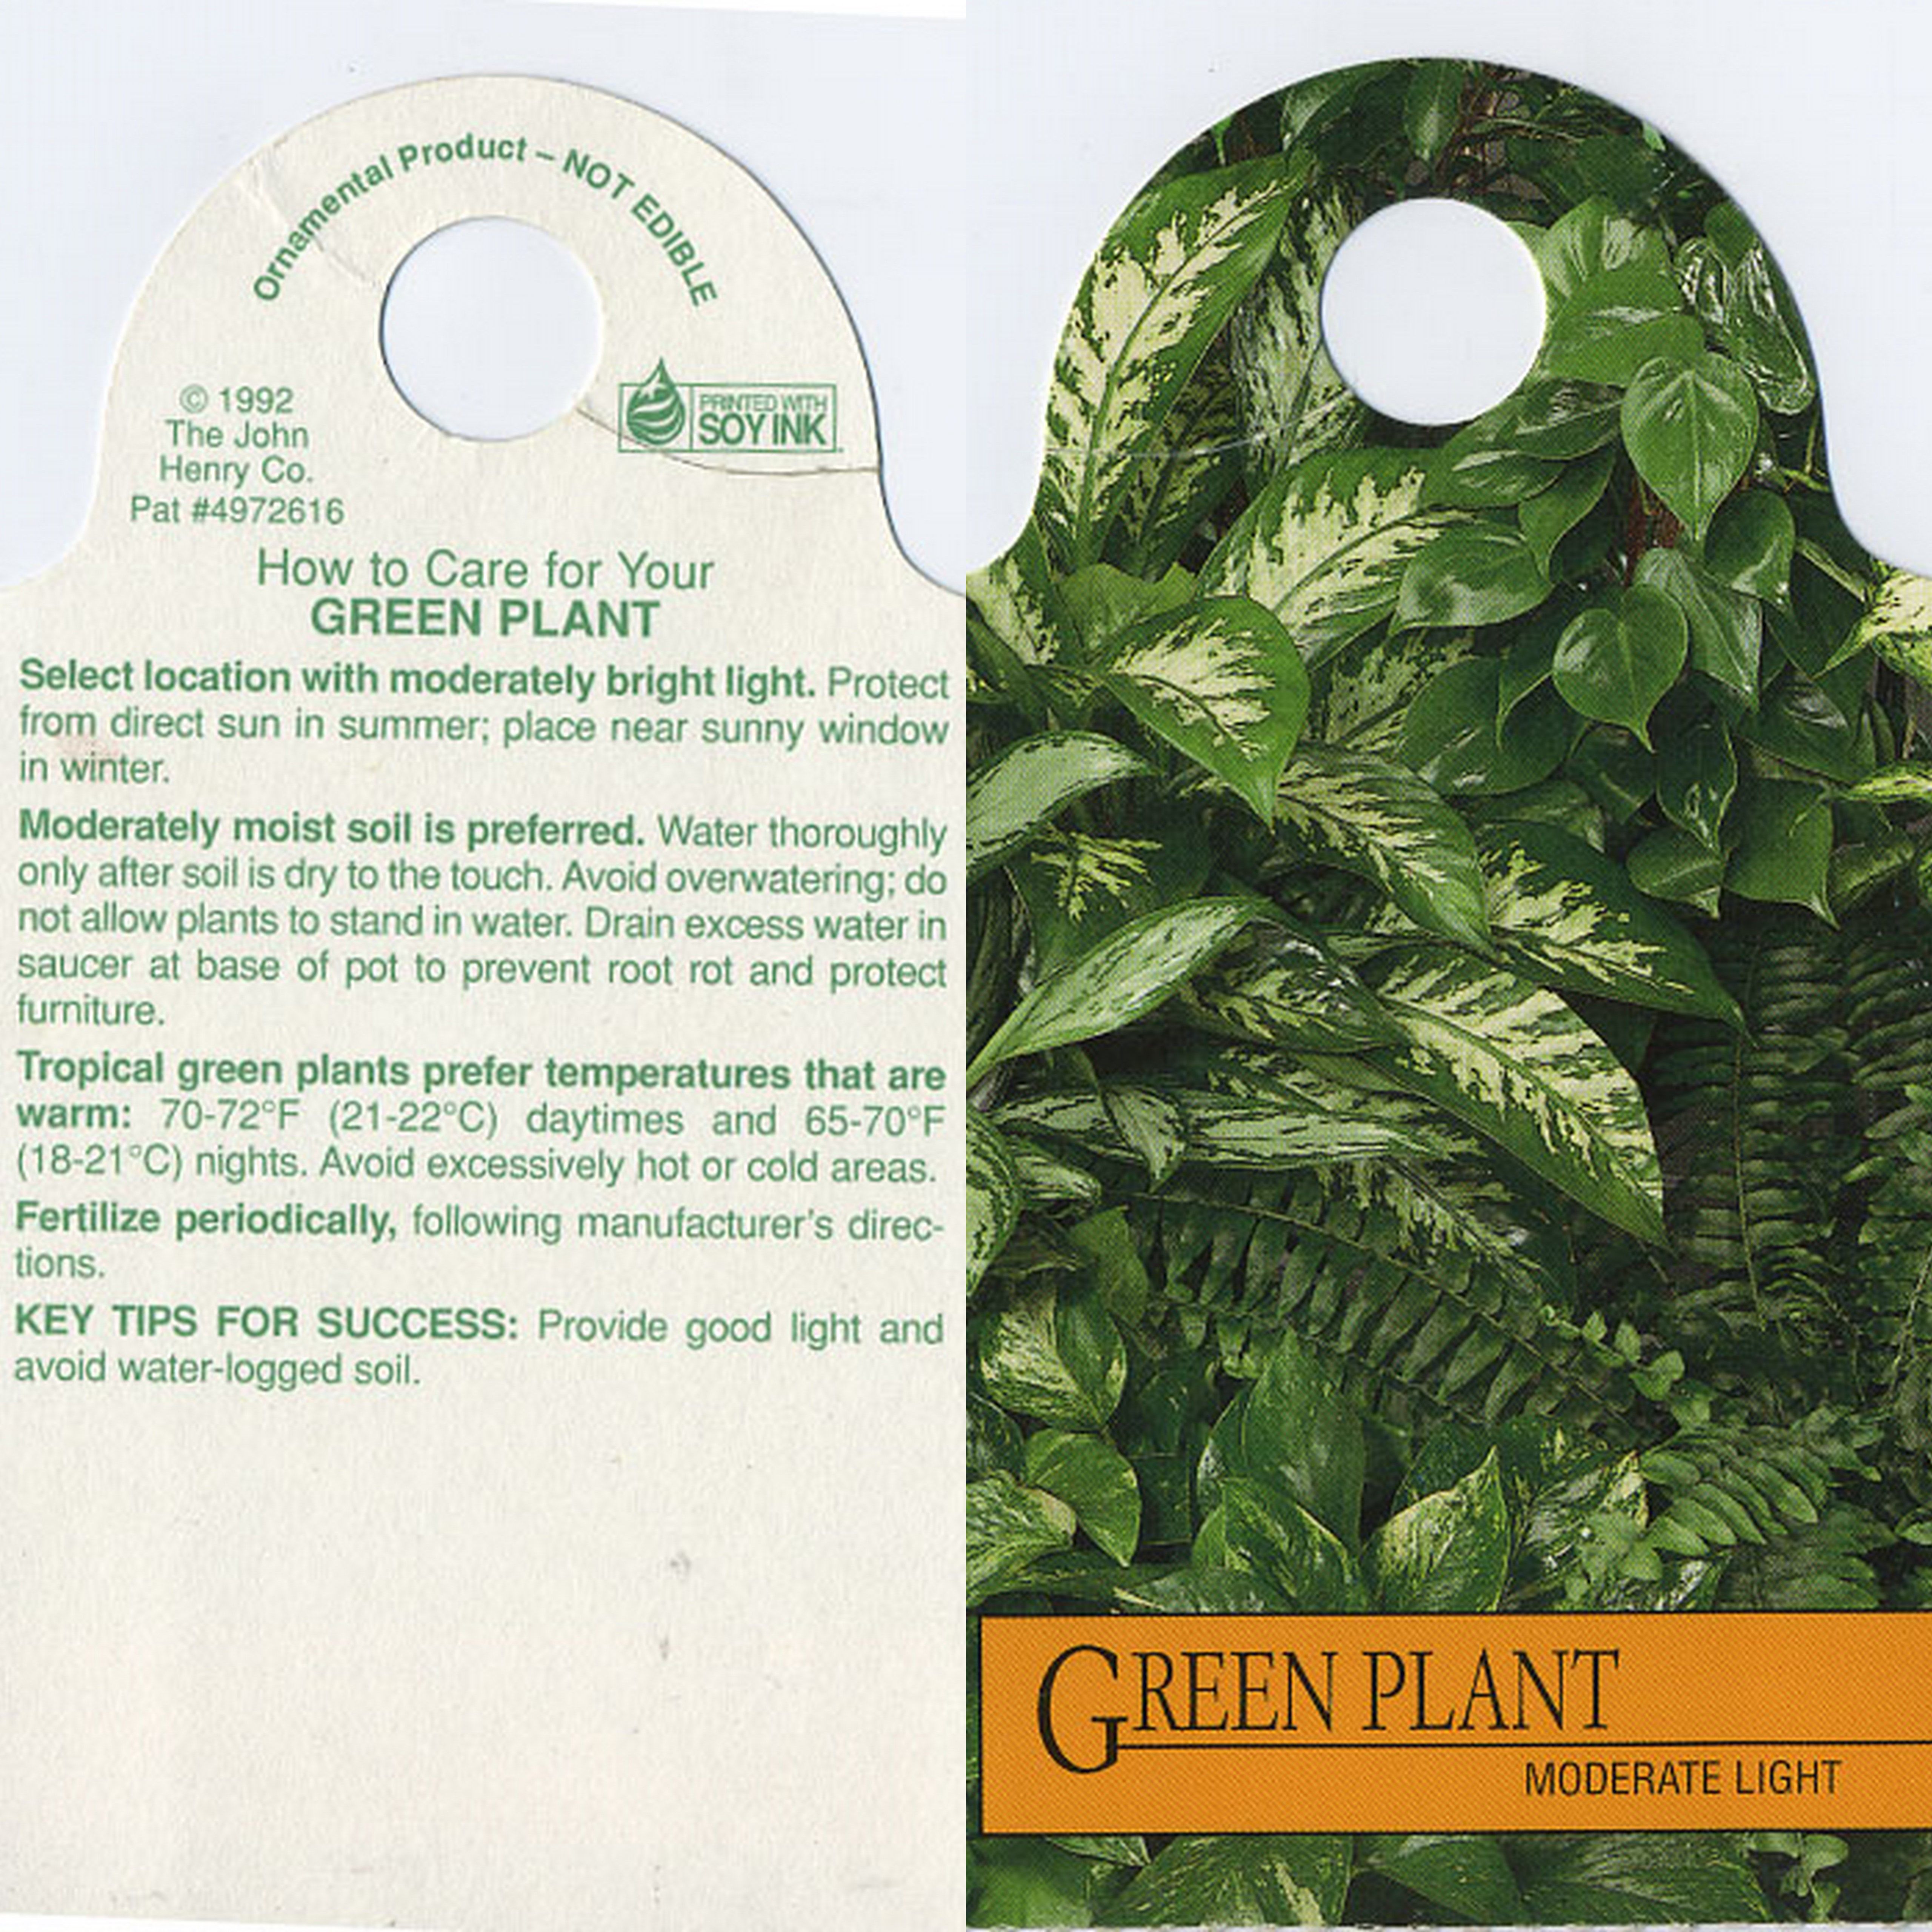 Greenplant - a useless and actually annoying plant tag | Garden ...